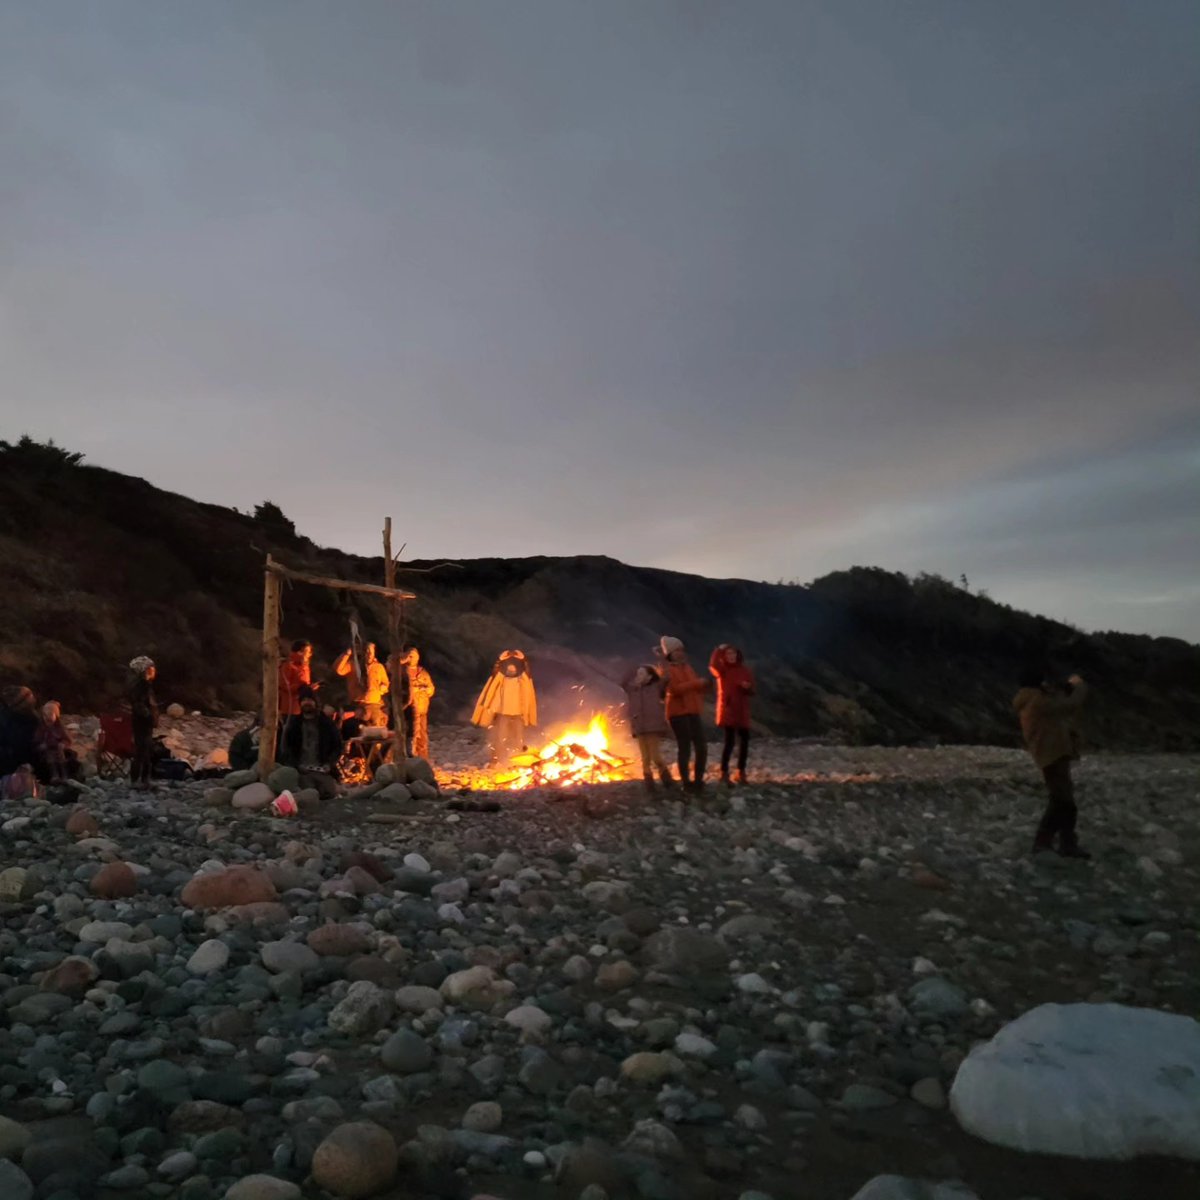 Had a great experience watching the solar eclipse with family and friends on the beach in Kippens, Bay St. George, #Newfoundland 🌗 Would love to know where others watched from and what it was like 🕶️ #SolarEclipse2024